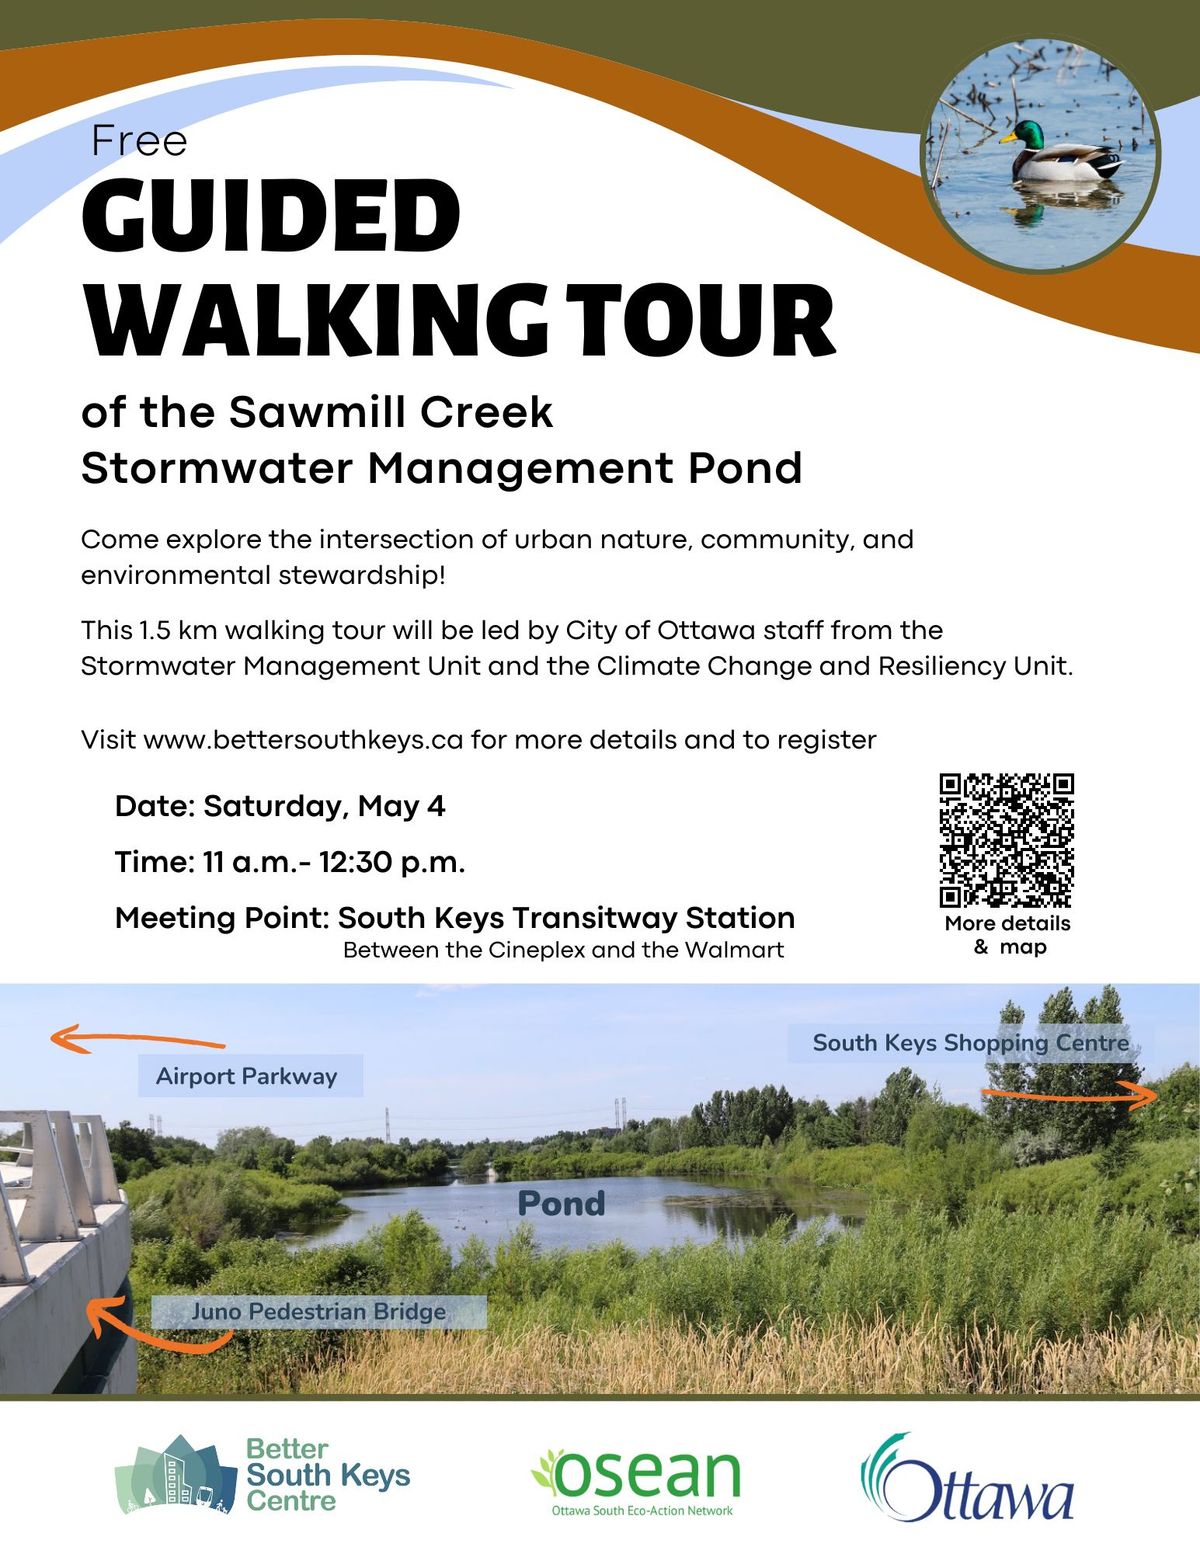 [EVENT IS FULL] Guided Walking Tour of the Sawmill Creek Stormwater Management Pond